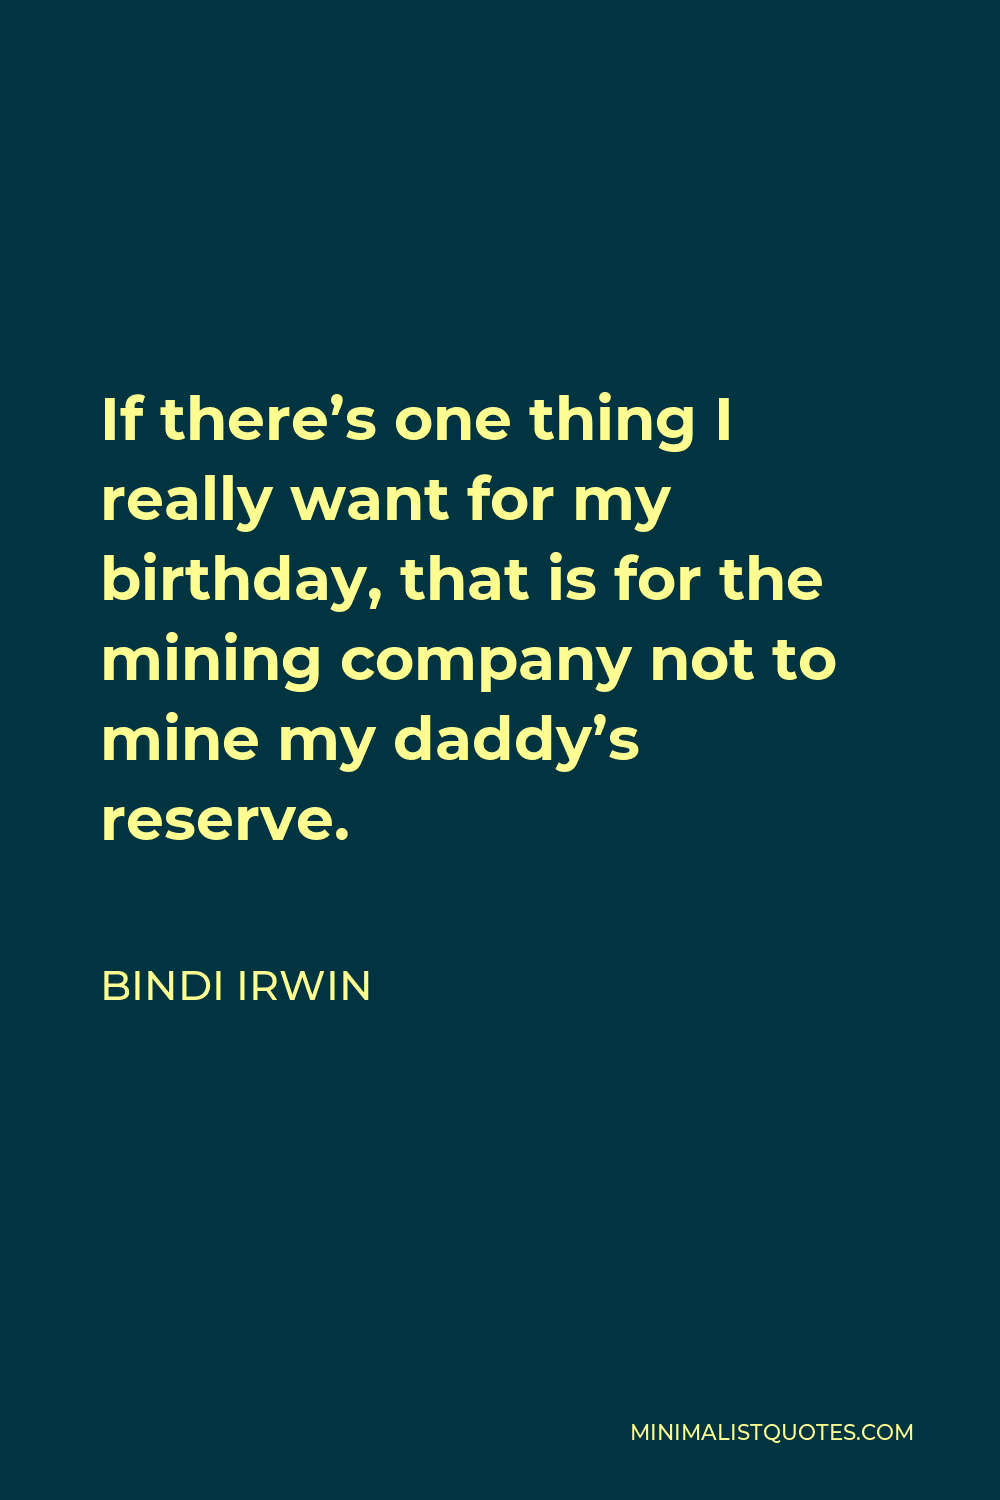 Bindi Irwin Quote - If there’s one thing I really want for my birthday, that is for the mining company not to mine my daddy’s reserve.